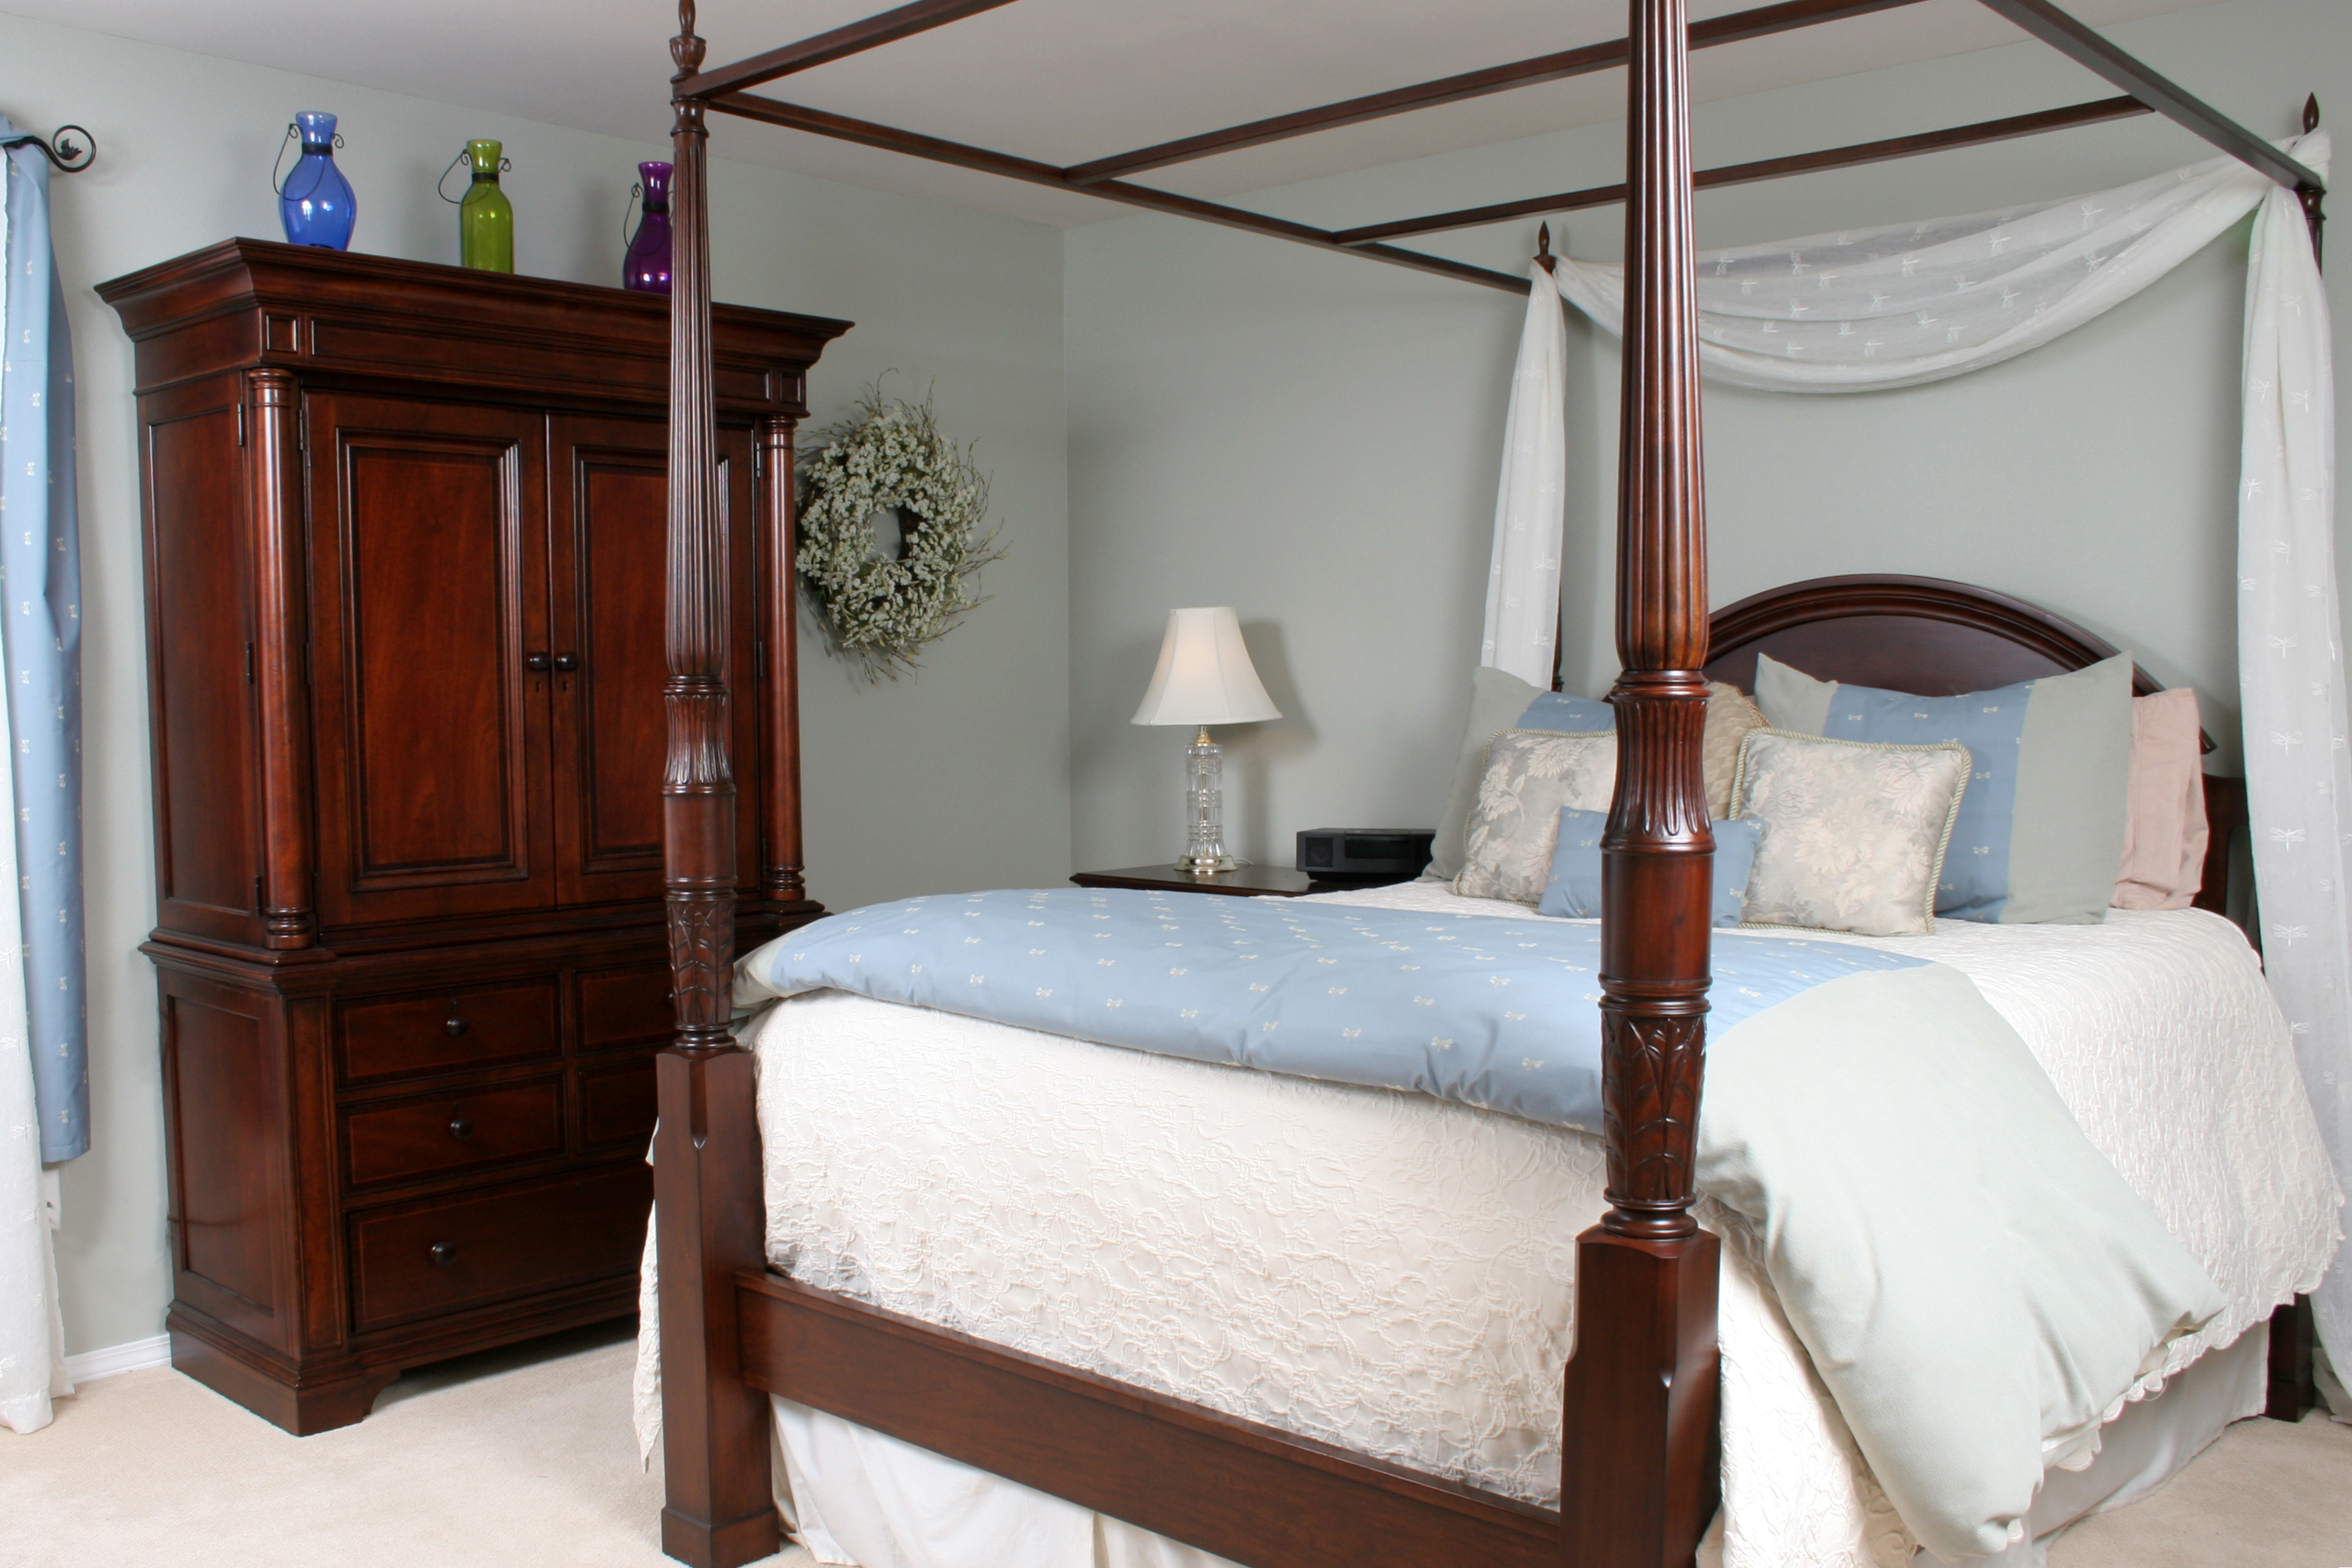 King Size And Queen Beds, Cot Sides For King Size Bed